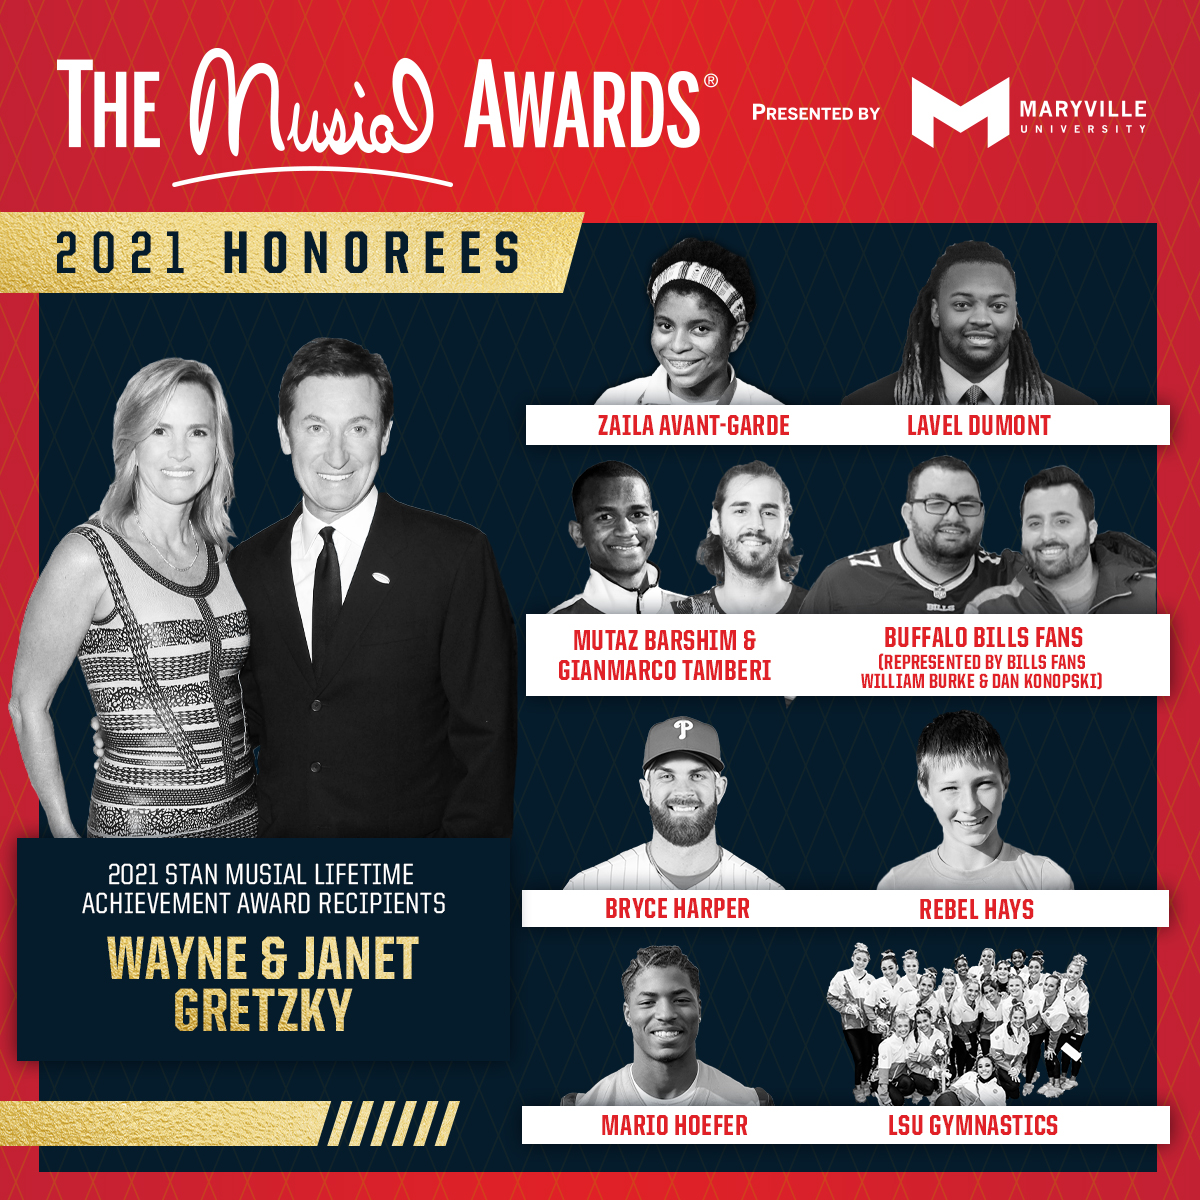 St. Louis Sports Commission Announces Recipients of the 2021 Musial Awards